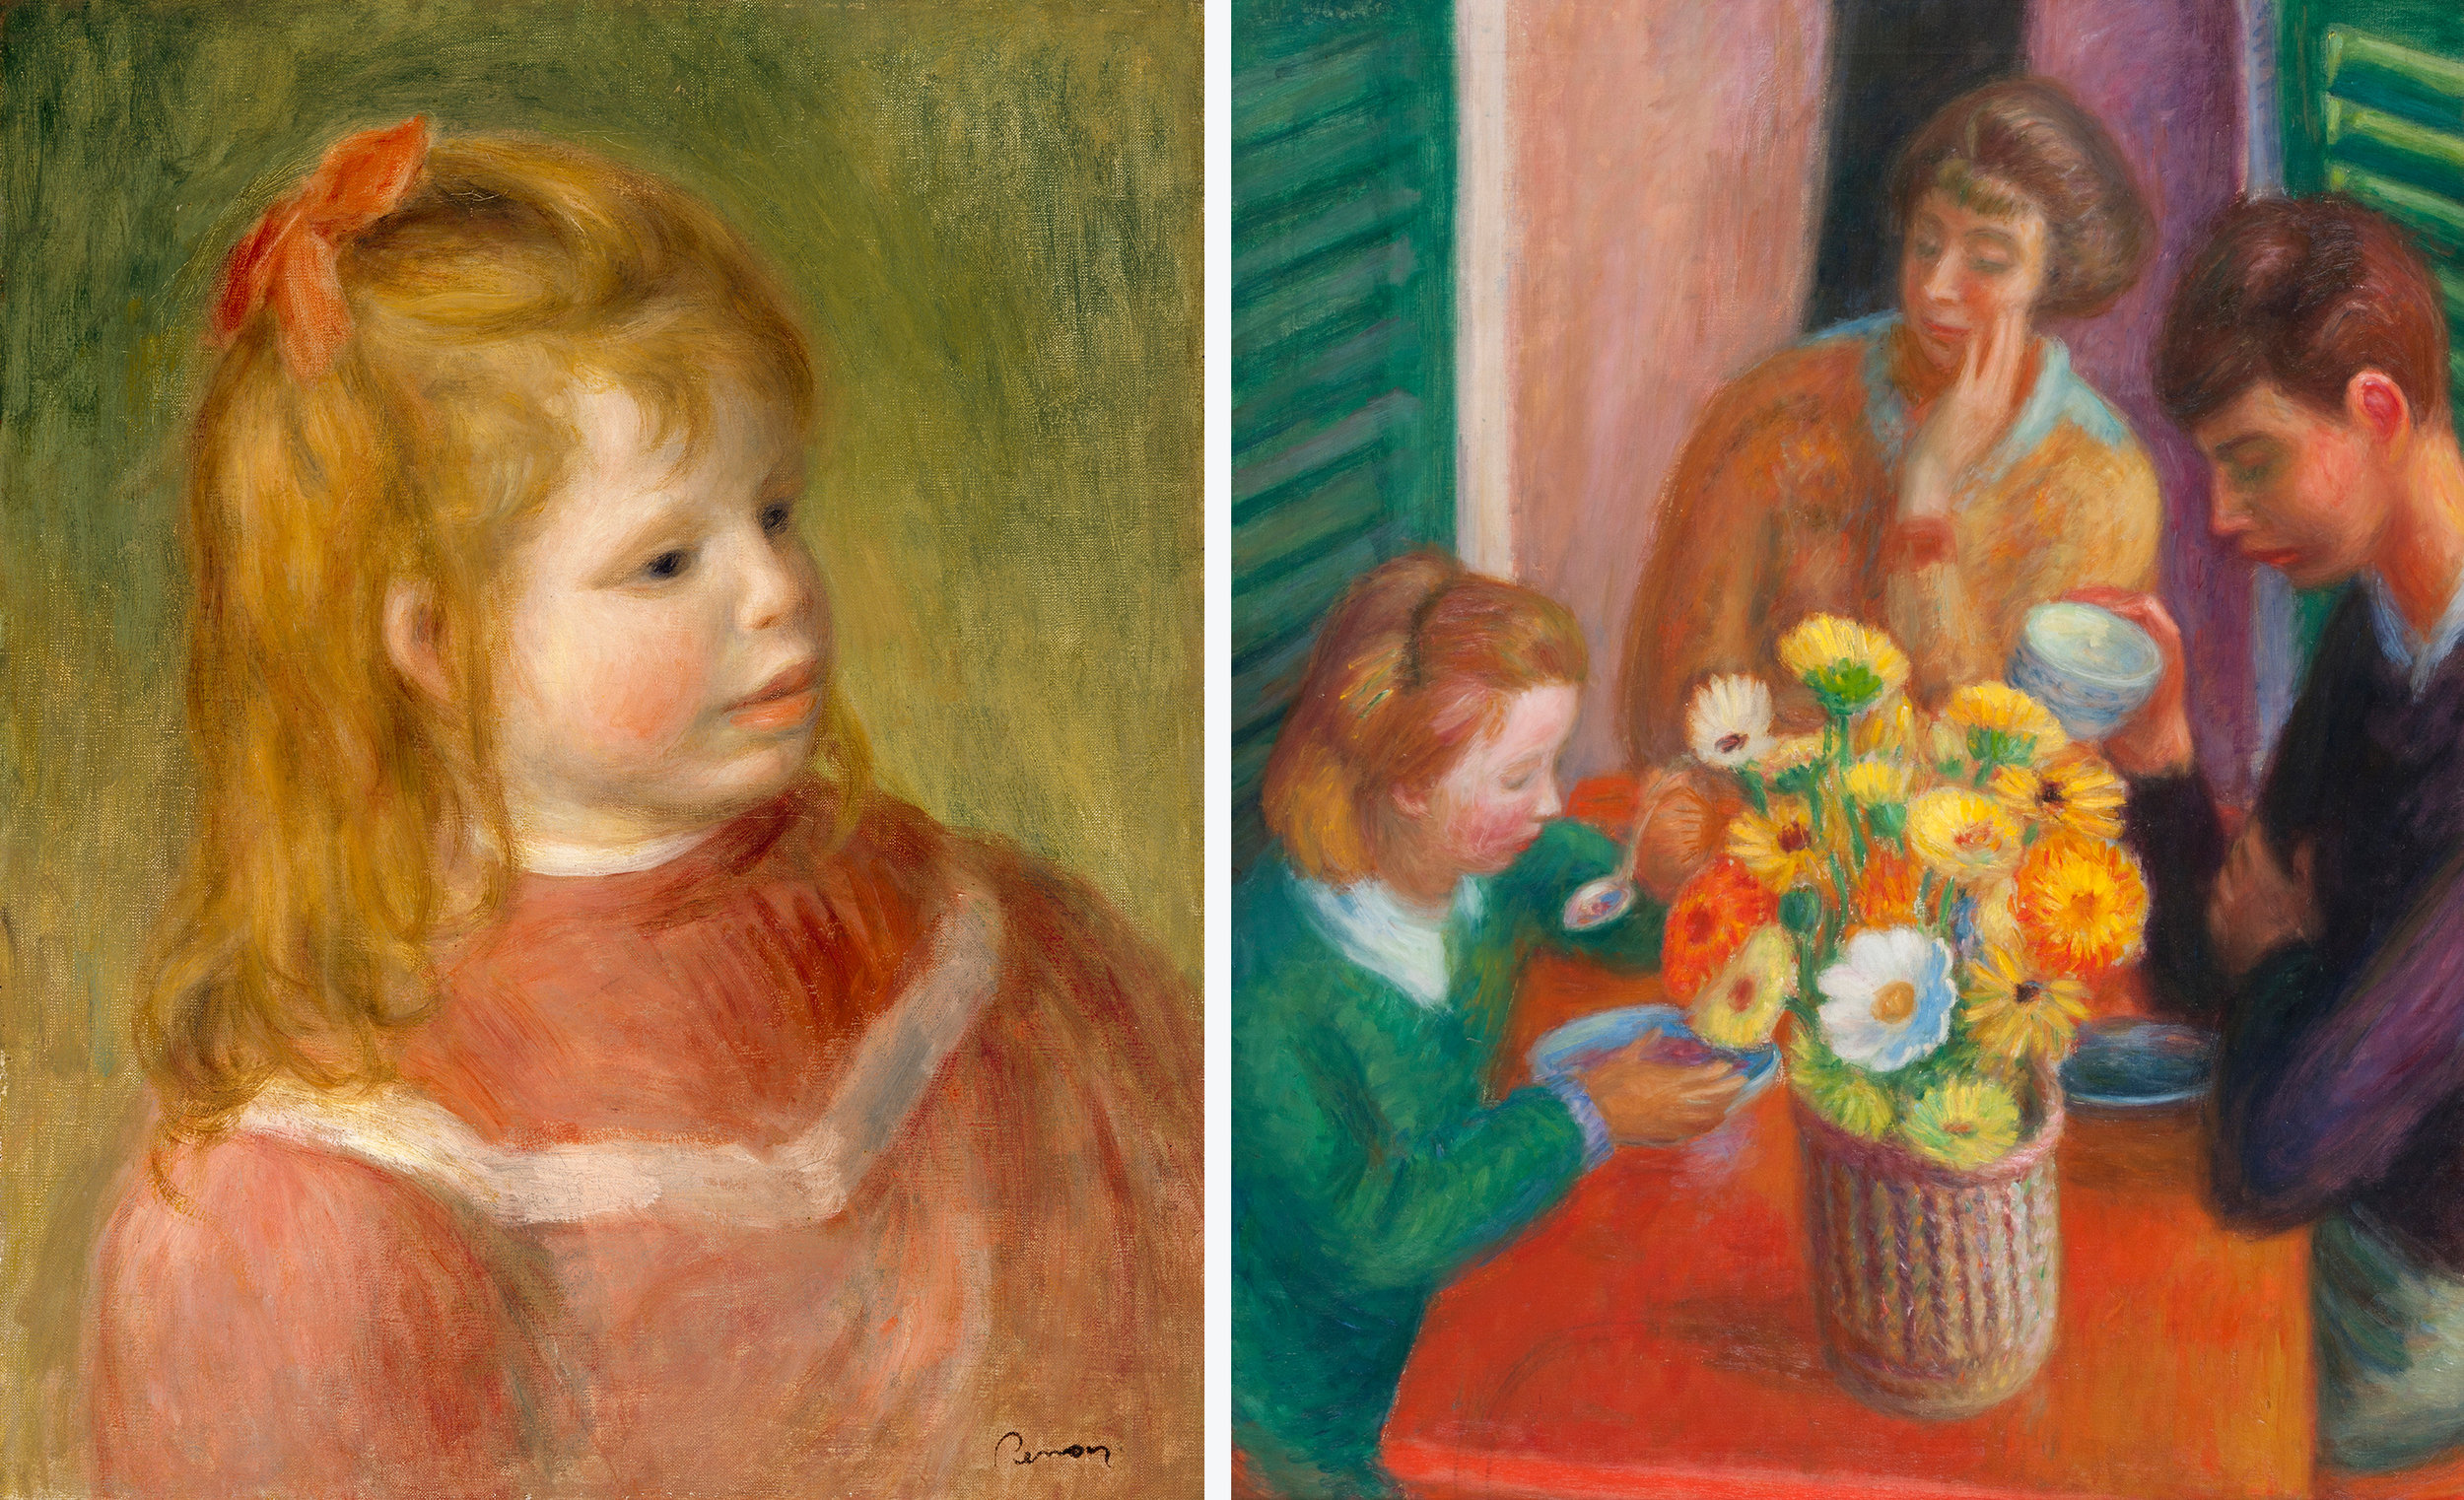 On the left is a painting of a young girl in a pink dress. On the right is a family at a table with a bouquet of flowers in the middle.